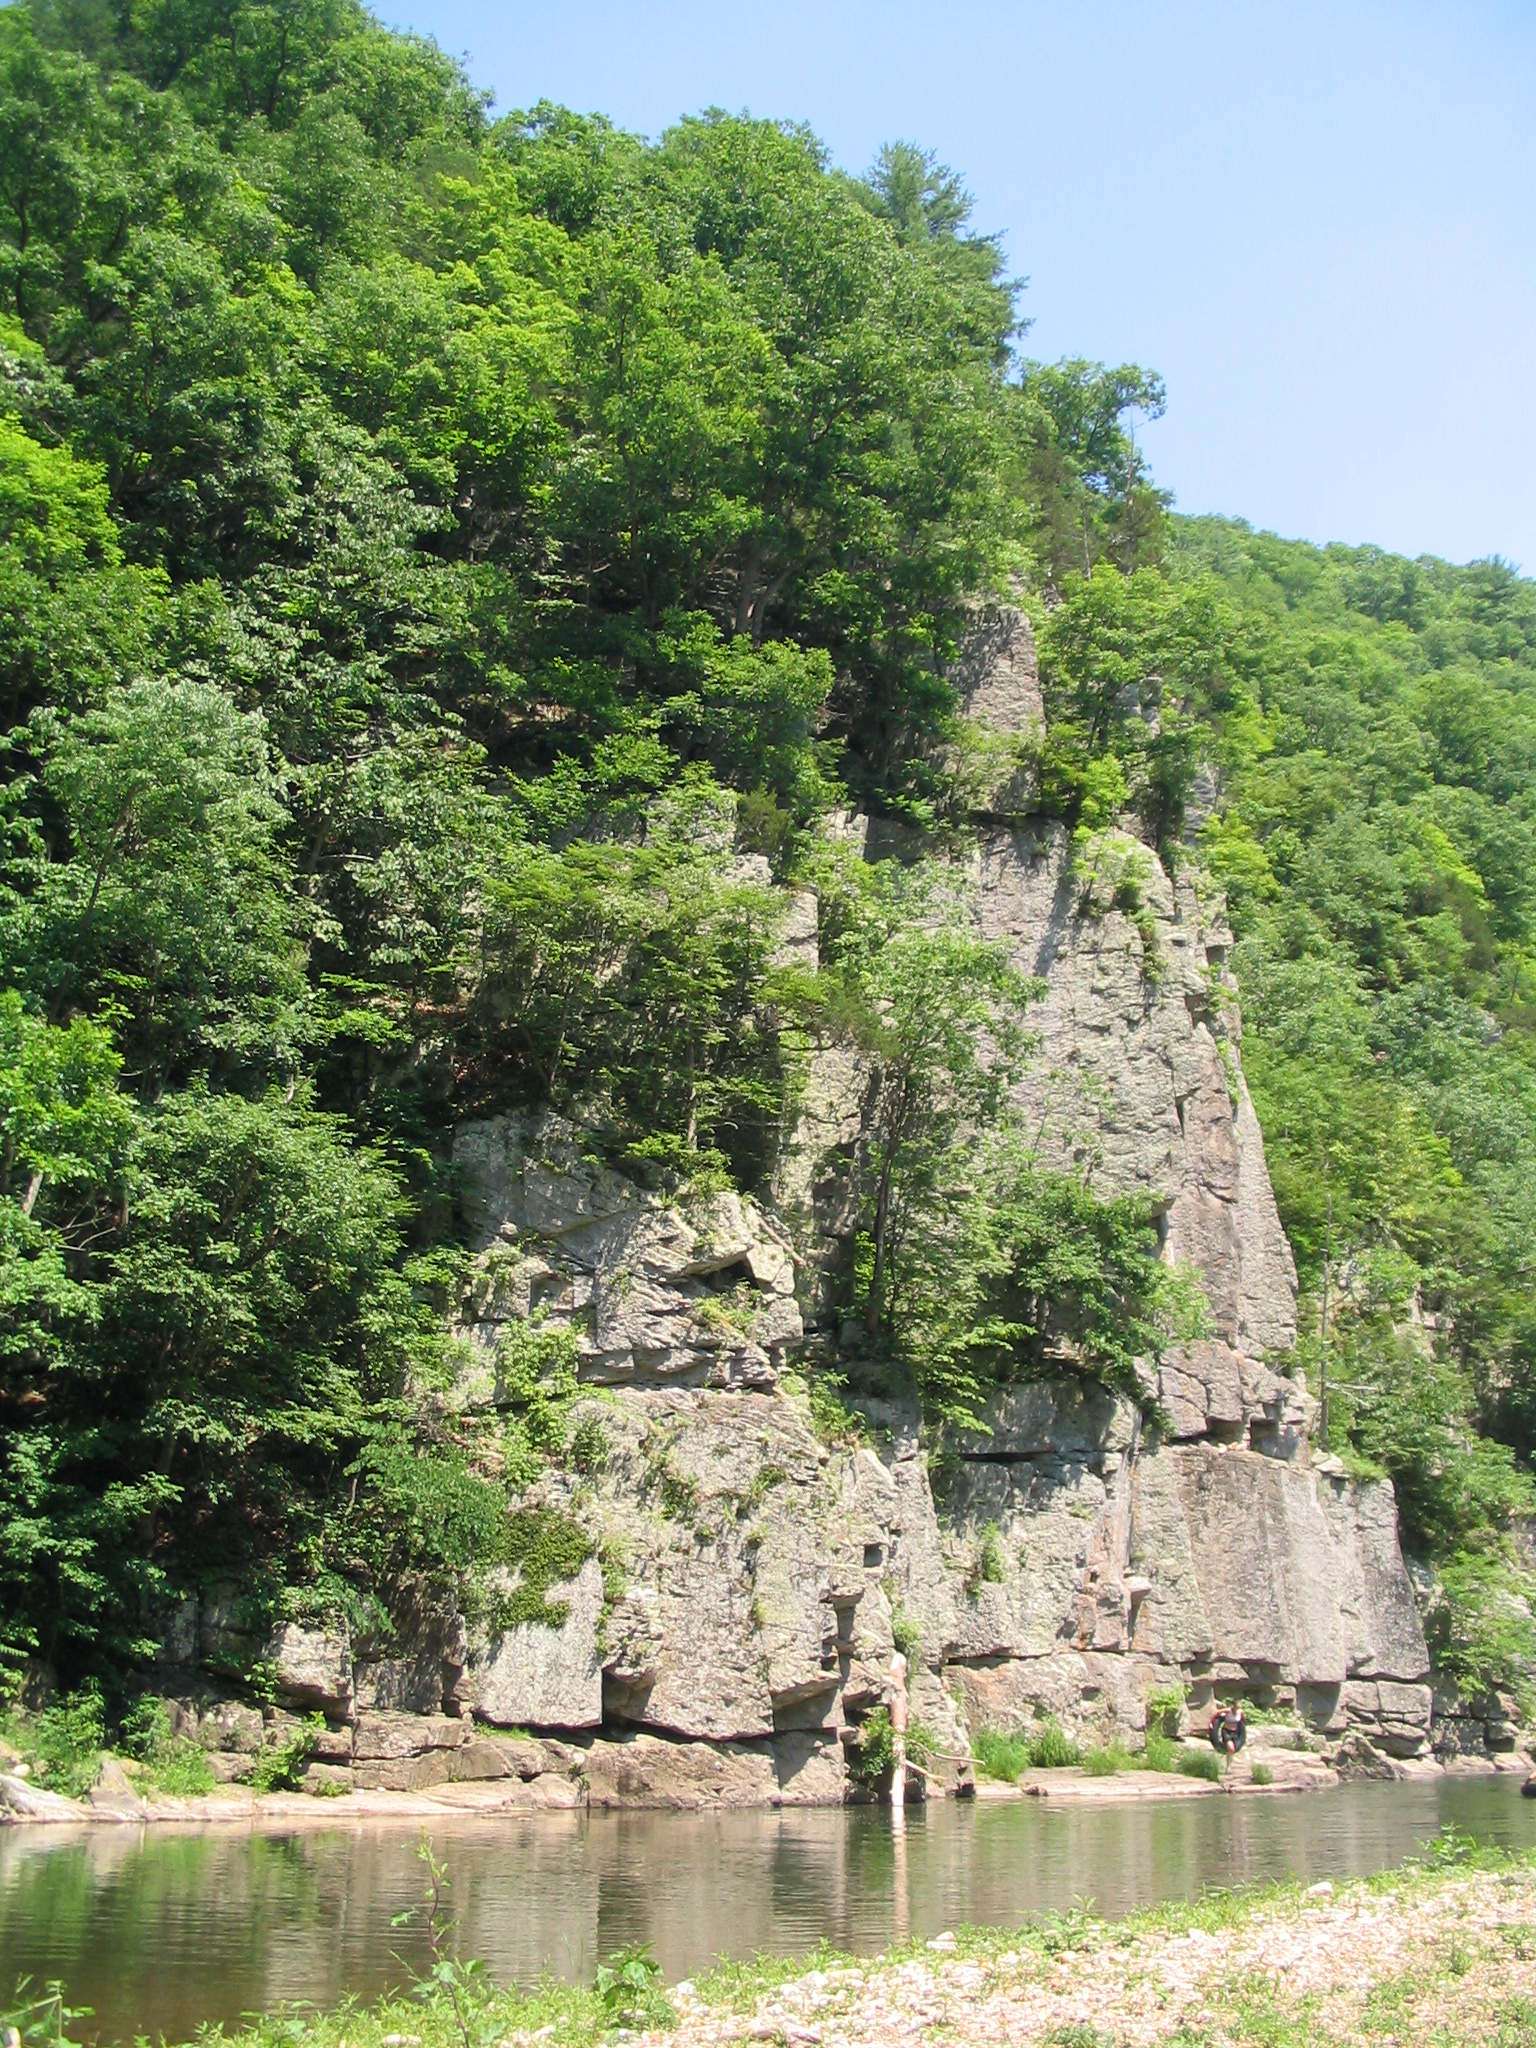 Beautiful views of rock formations along the South Branch of the Potomac River.